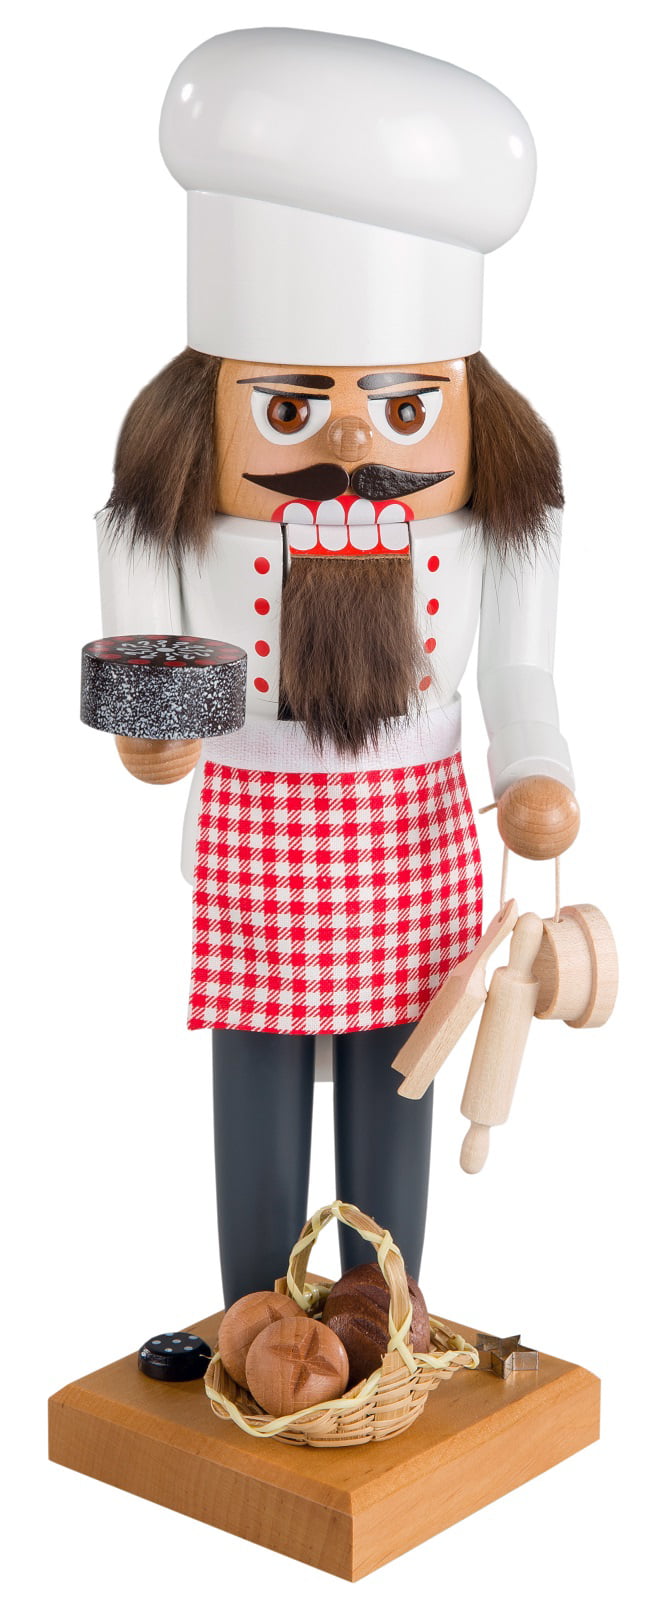 KWO Baker Man with Bread German Wood Christmas Nutcracker Made in Germany